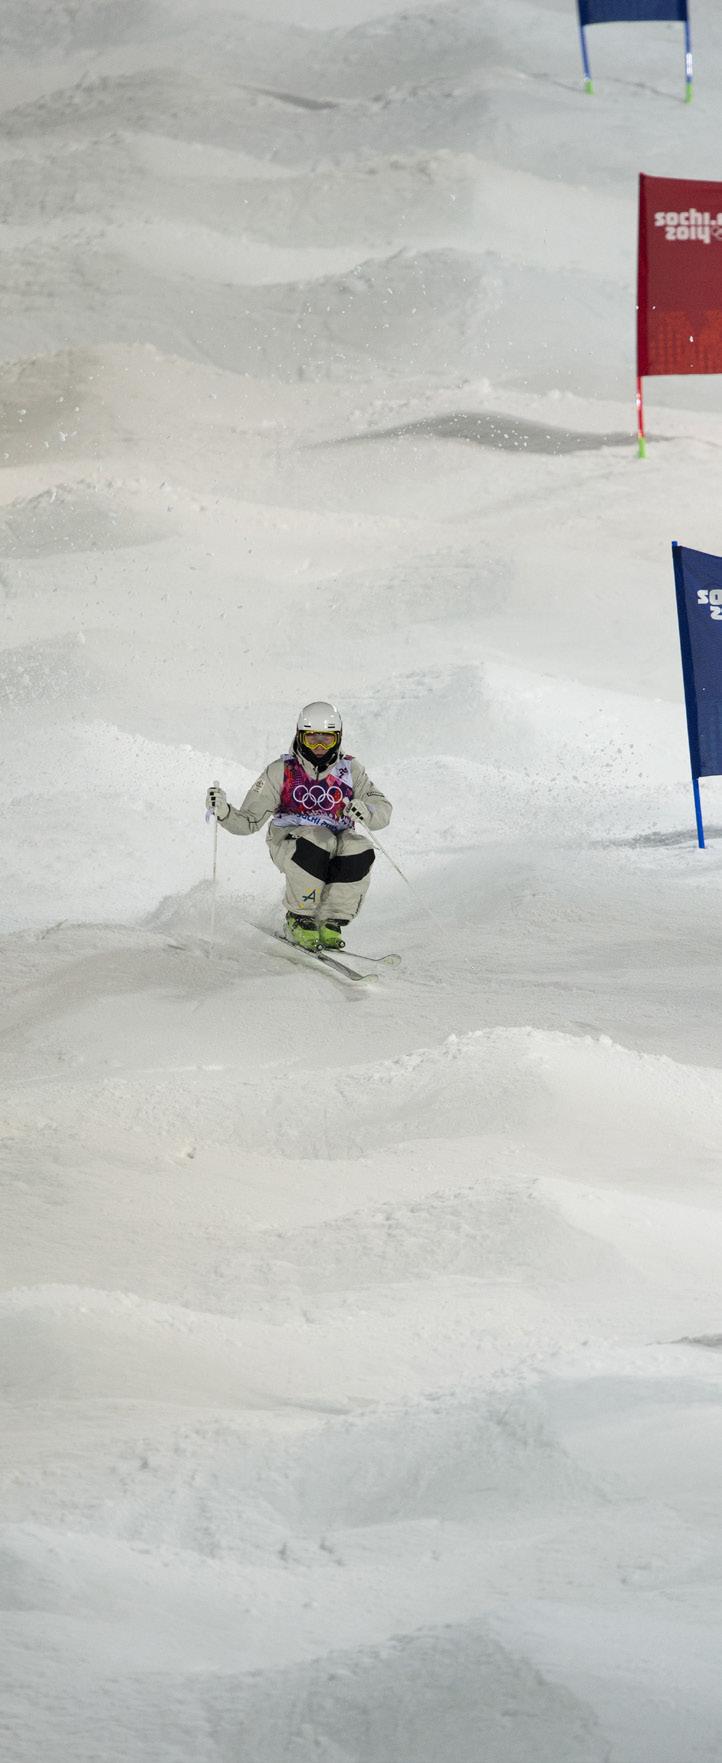 HOW IS INTERSCHOOLS MOGULS SCORED? Interschools moguls is judged by a panel of 3 or 4 judges, with a Head Judge overseeing the scoring.